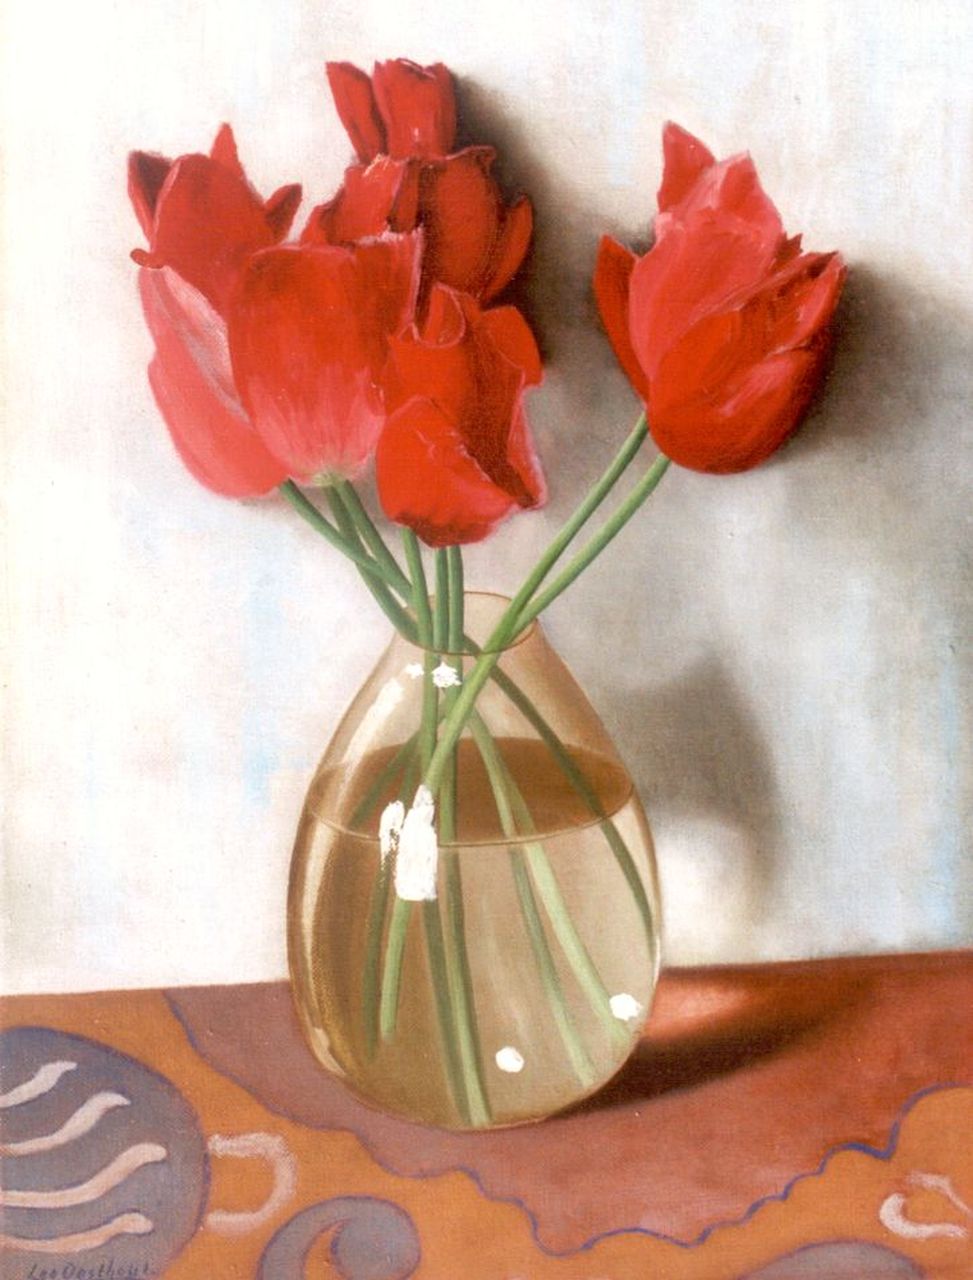 Oosthout L.P.B.  | Leonardus Petrus Balthazar 'Leo' Oosthout, Tulips in a vase, oil on canvas 40.0 x 30.0 cm, signed l.l.